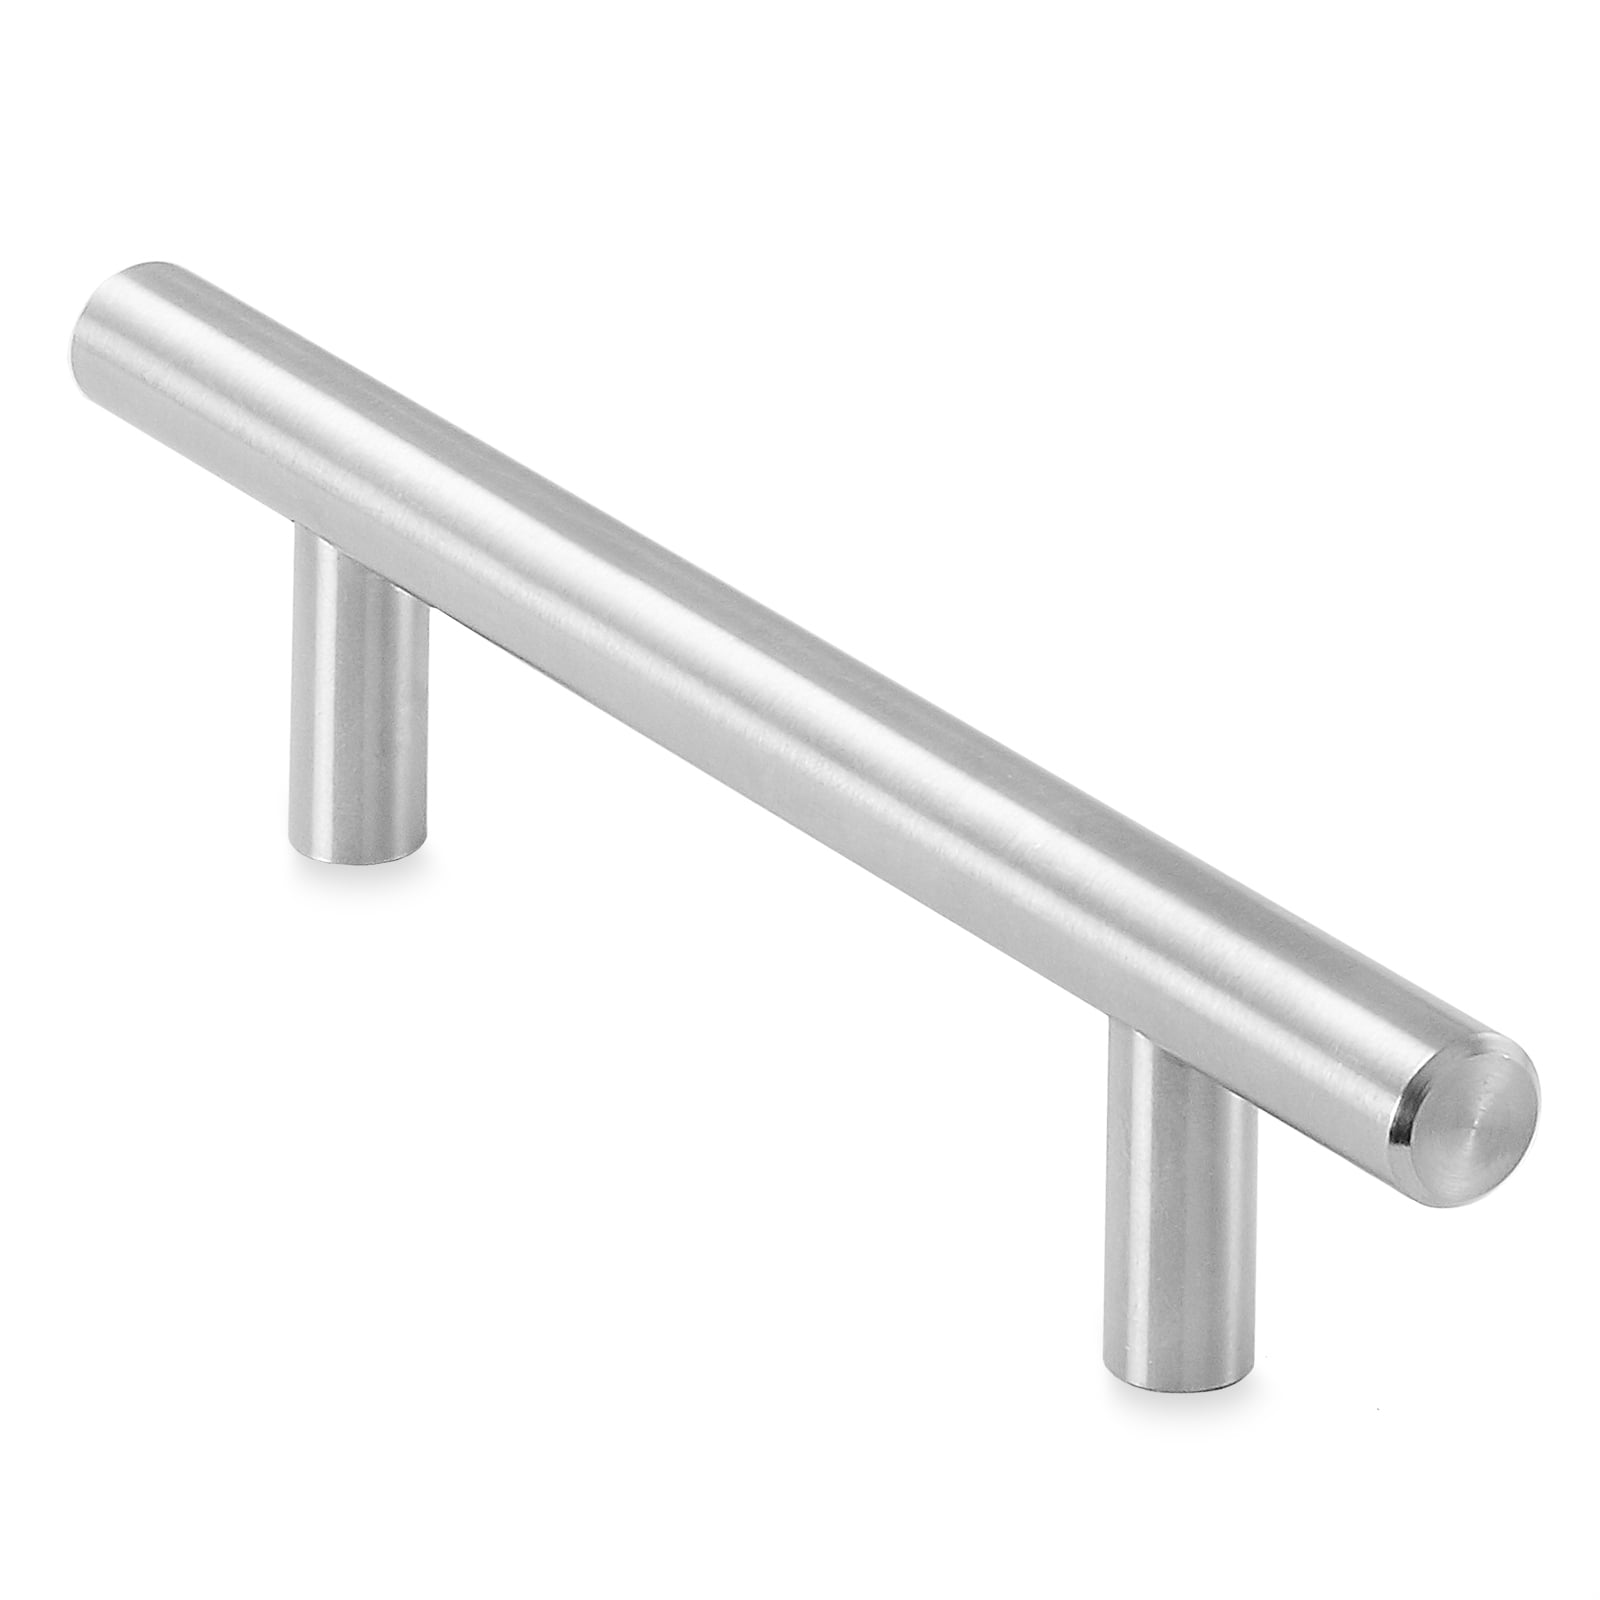 20 New Stainless Steel Cabinet Bar pull pulls 3 3/4" 96MM Brushed Satin nickel 